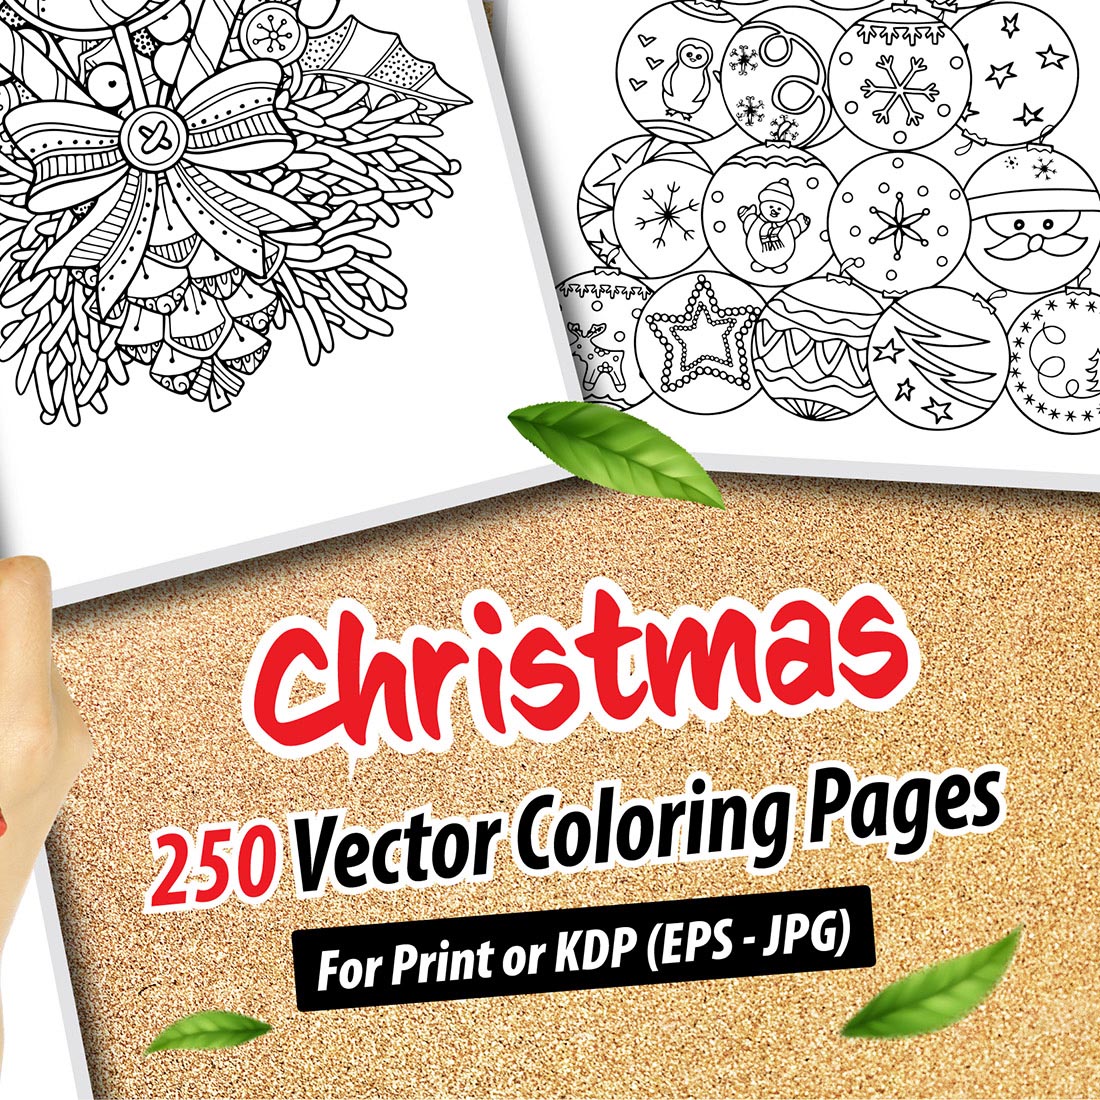 250 Vector Christmas Coloring Pages cover image.